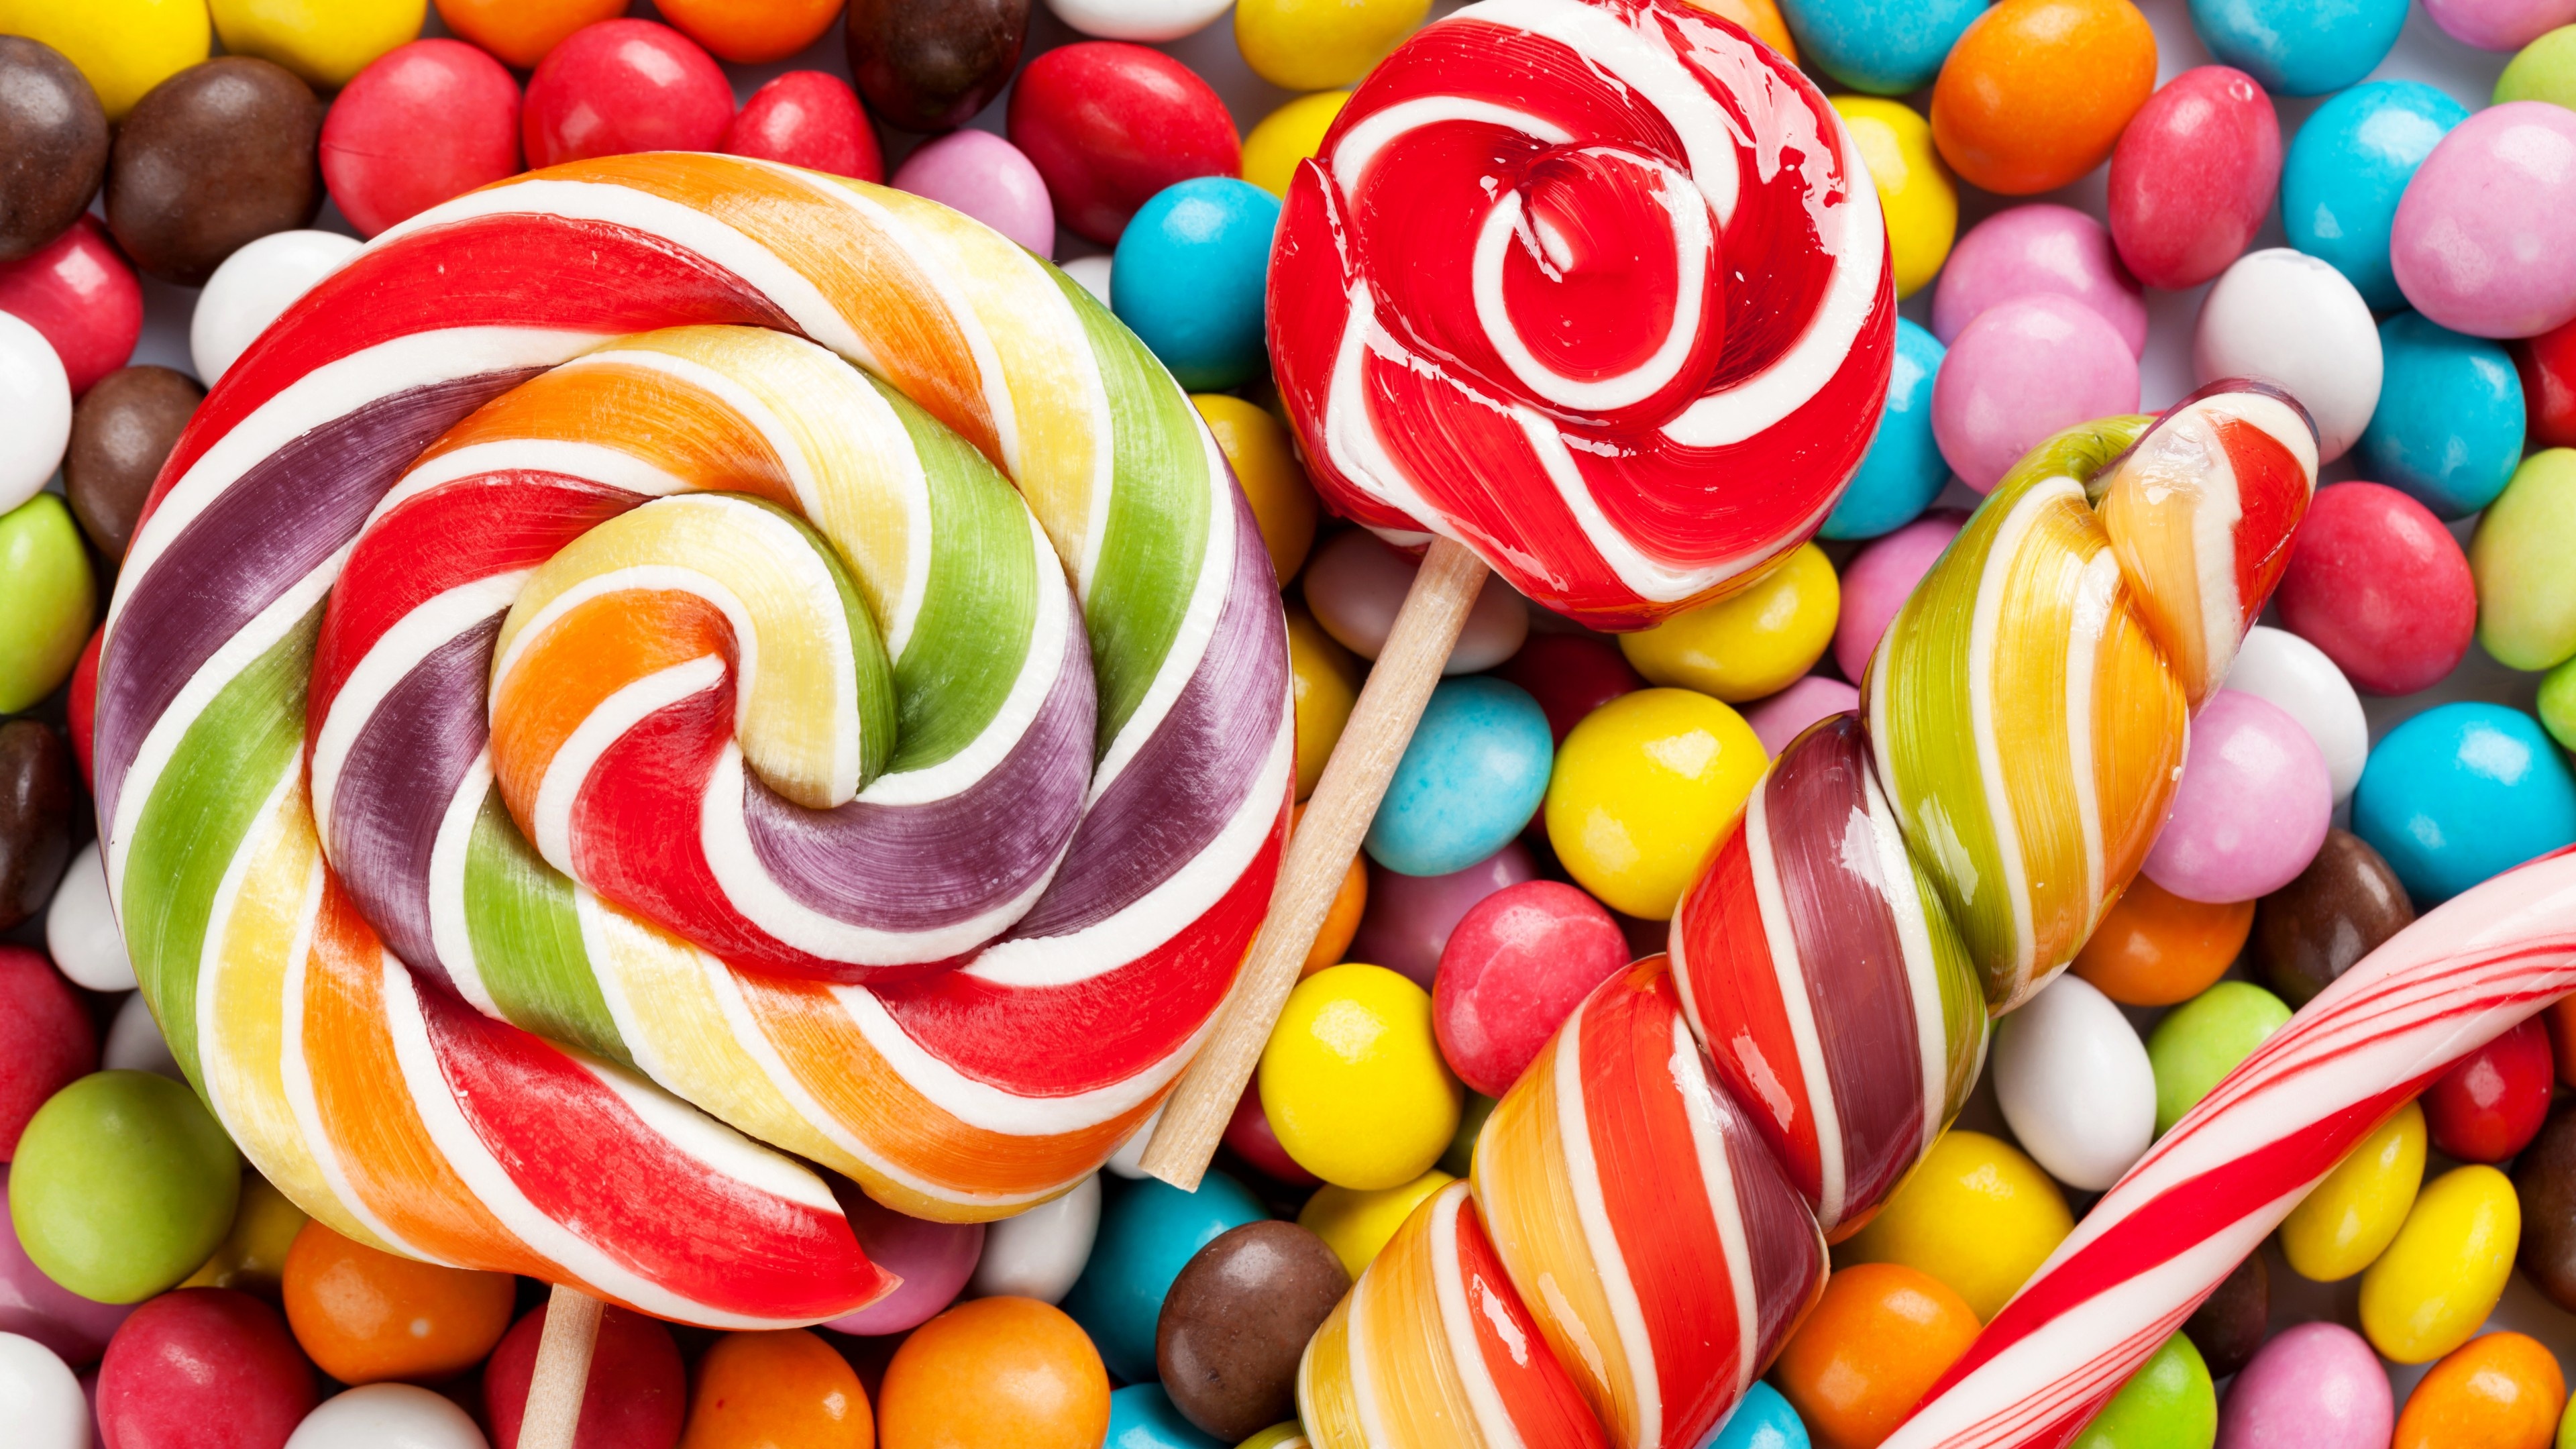 Colorful candy wallpaper, Vibrant and eye-catching, Sweet indulgence, Sugar-filled delight, 3840x2160 4K Desktop